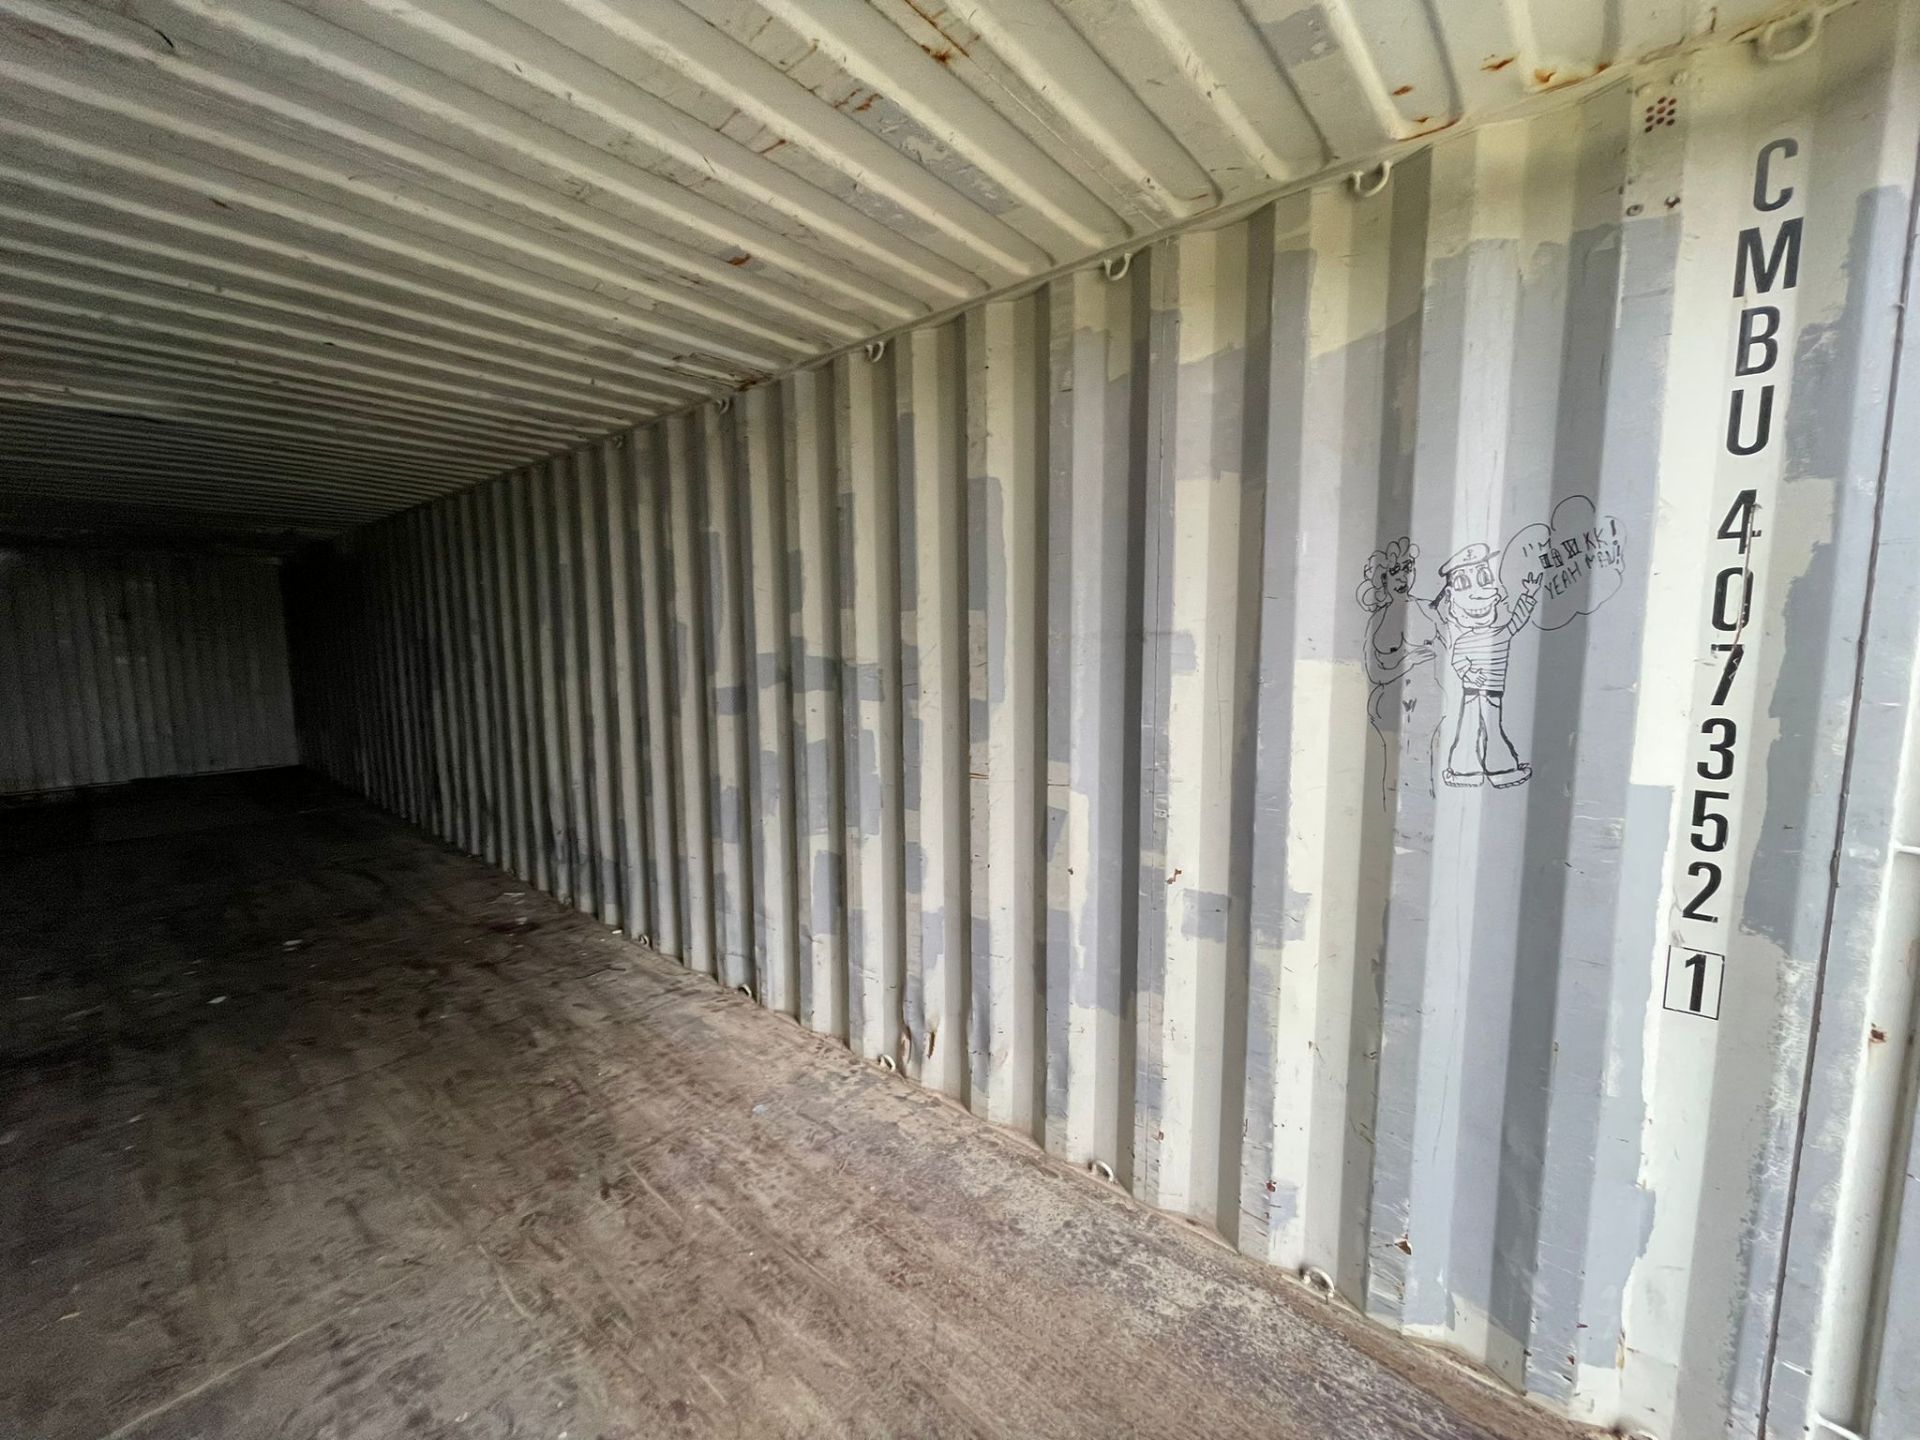 Shipping Container - ref CMBU4073521 - NO RESERVE (40’ GP - Standard) - Image 2 of 4